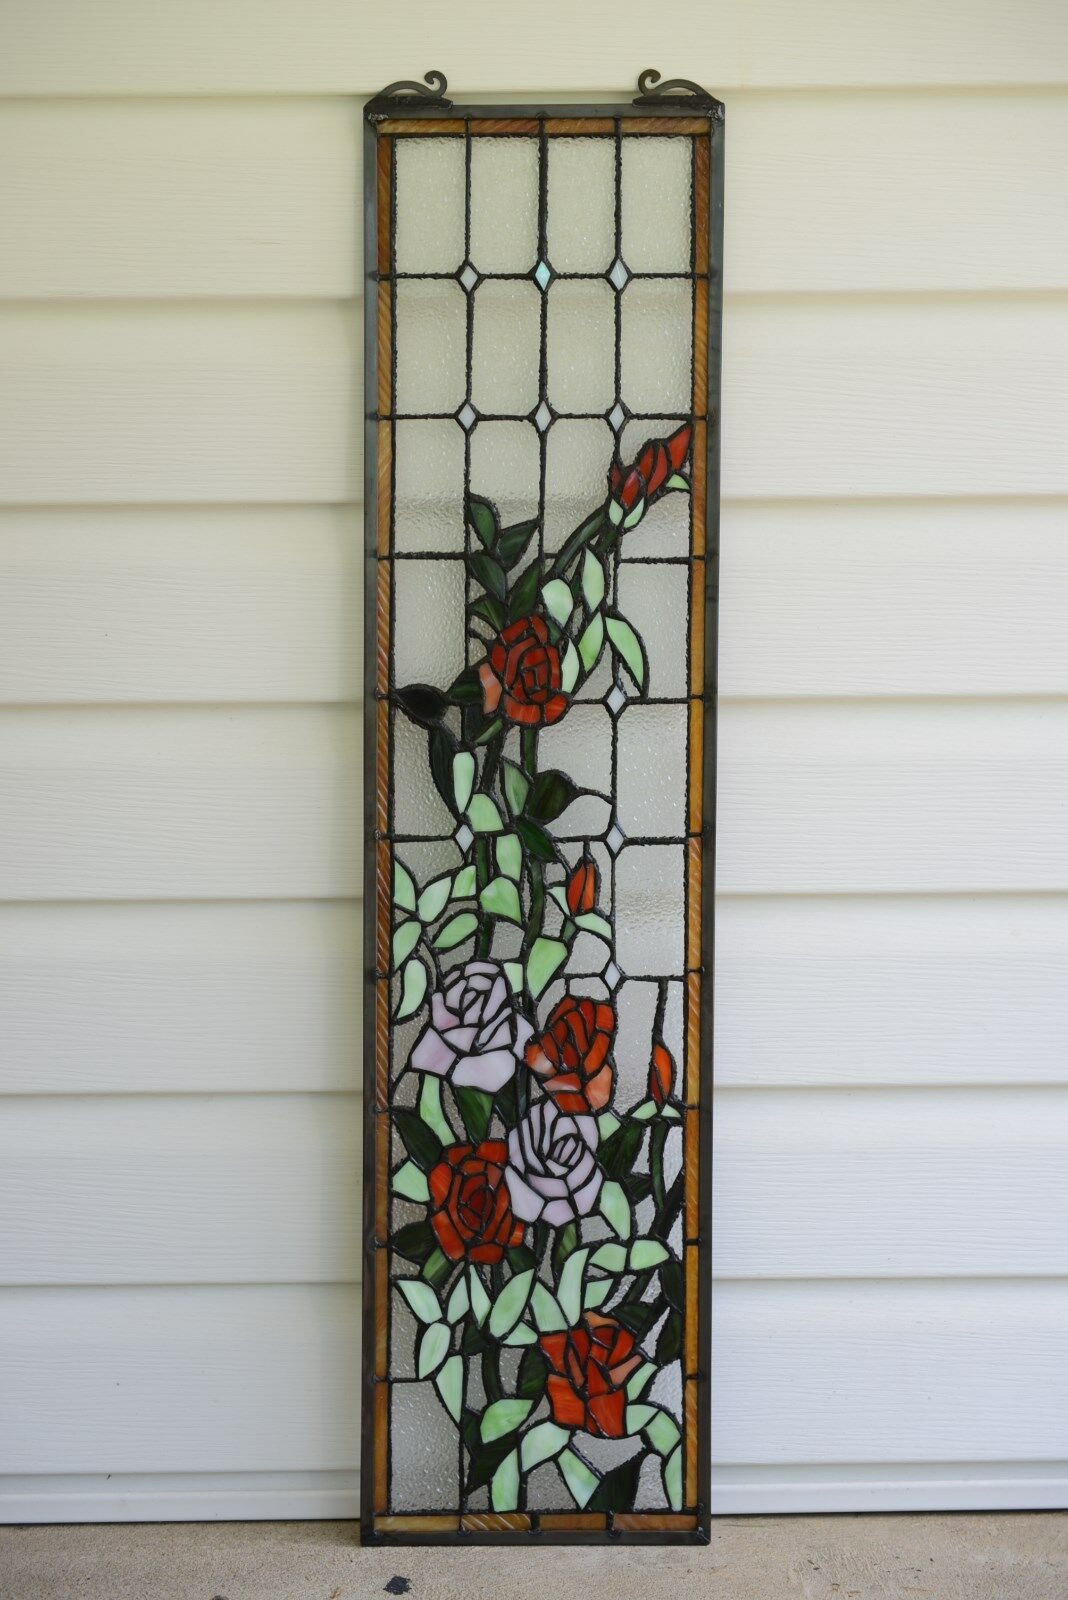 9" X 36" Rose Flowers Handcrafted Stained Glass Window Panel